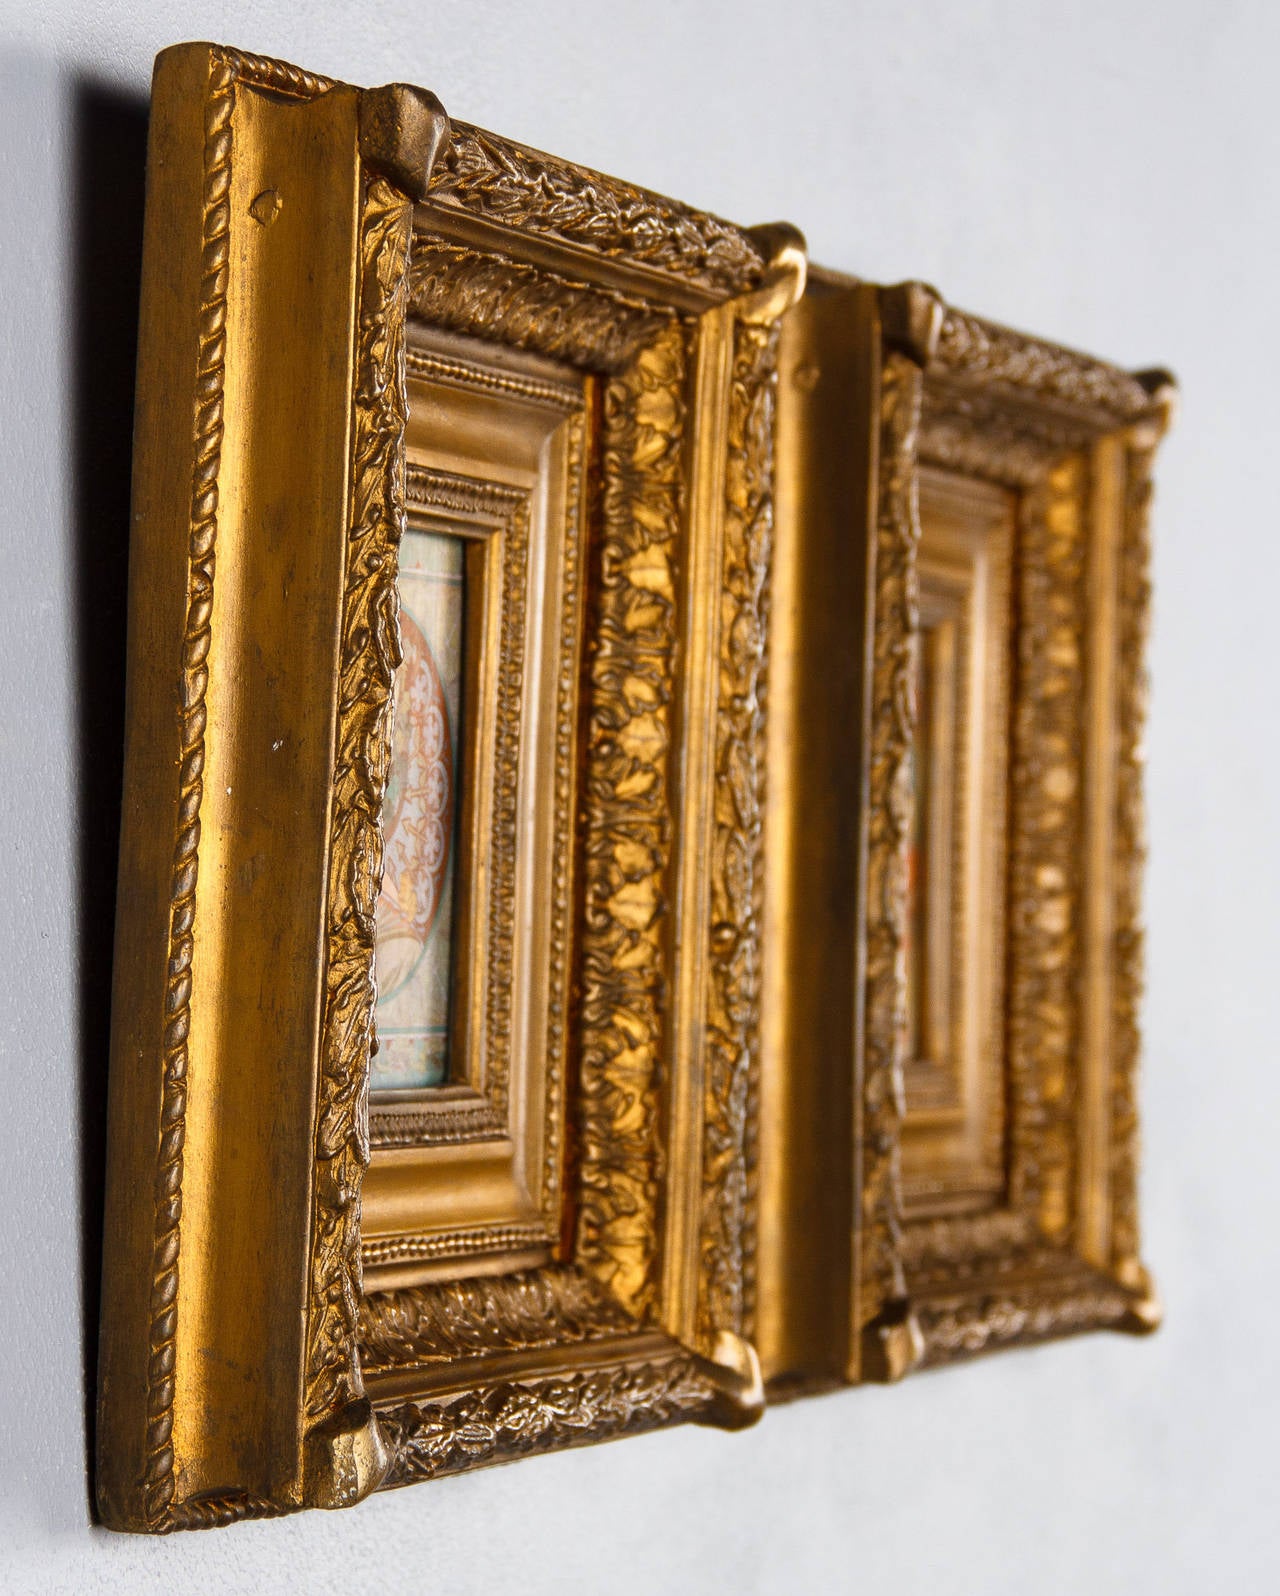 A beautiful Pair of gold leaf wooden French Art Nouveau Frames with art prints dating to the Art Nouveau era.